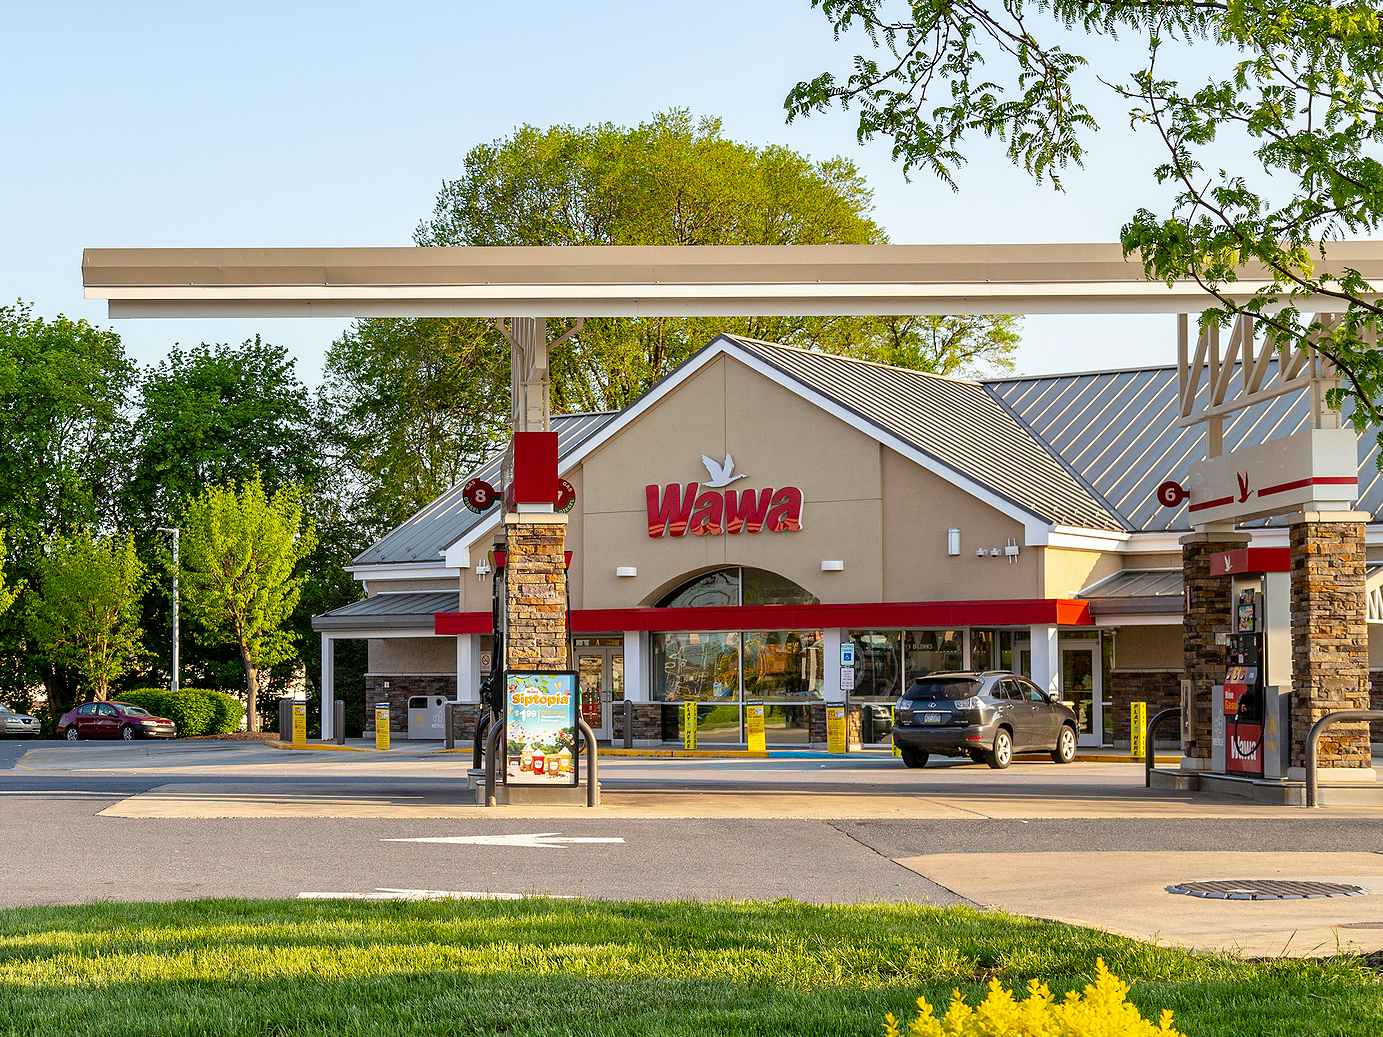 A Wawa gas station and convenience store